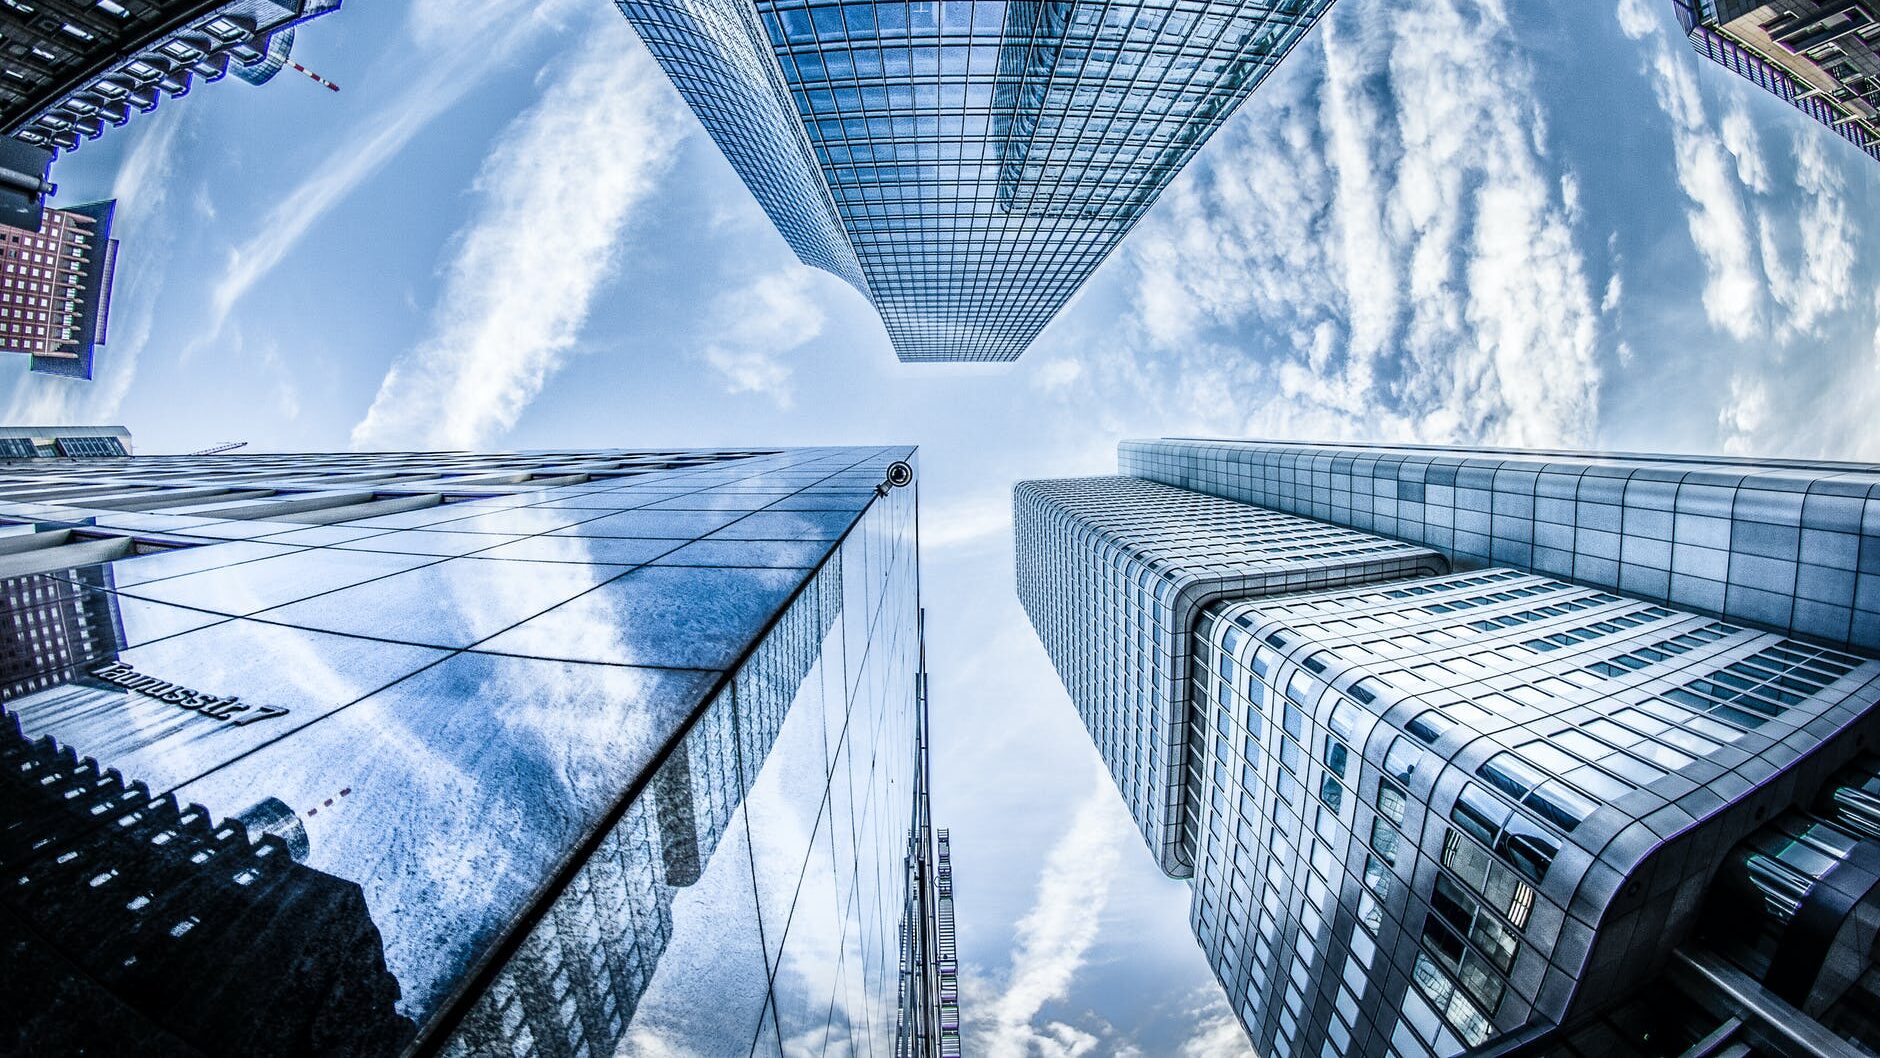 low angle photo of four high rise curtain wall buildings under white clouds and blue sky